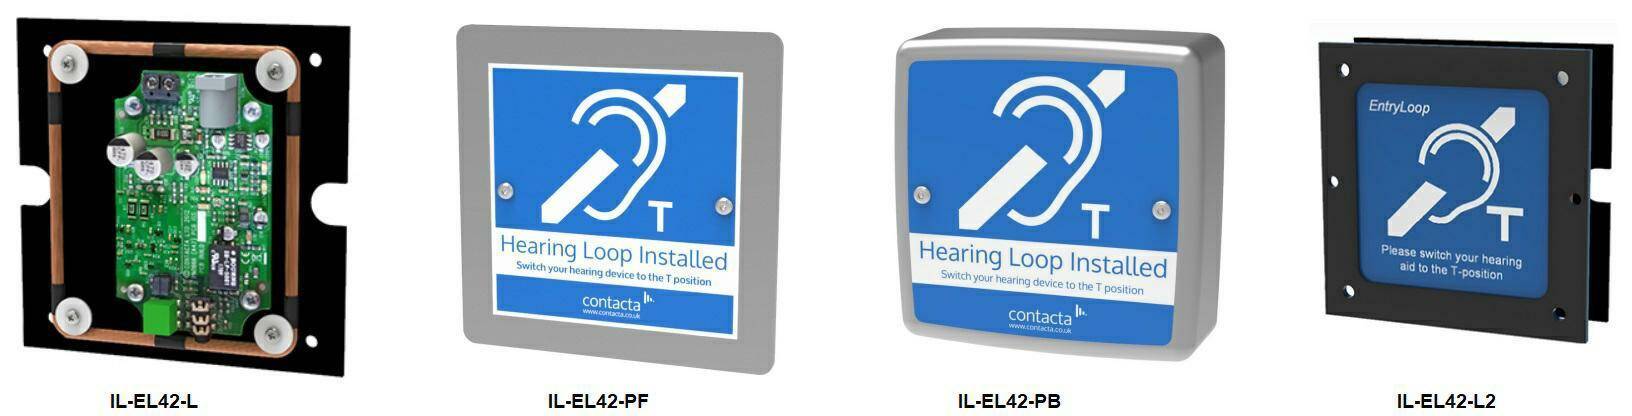 Induction loop for installation in an information kiosk at a train station or airport